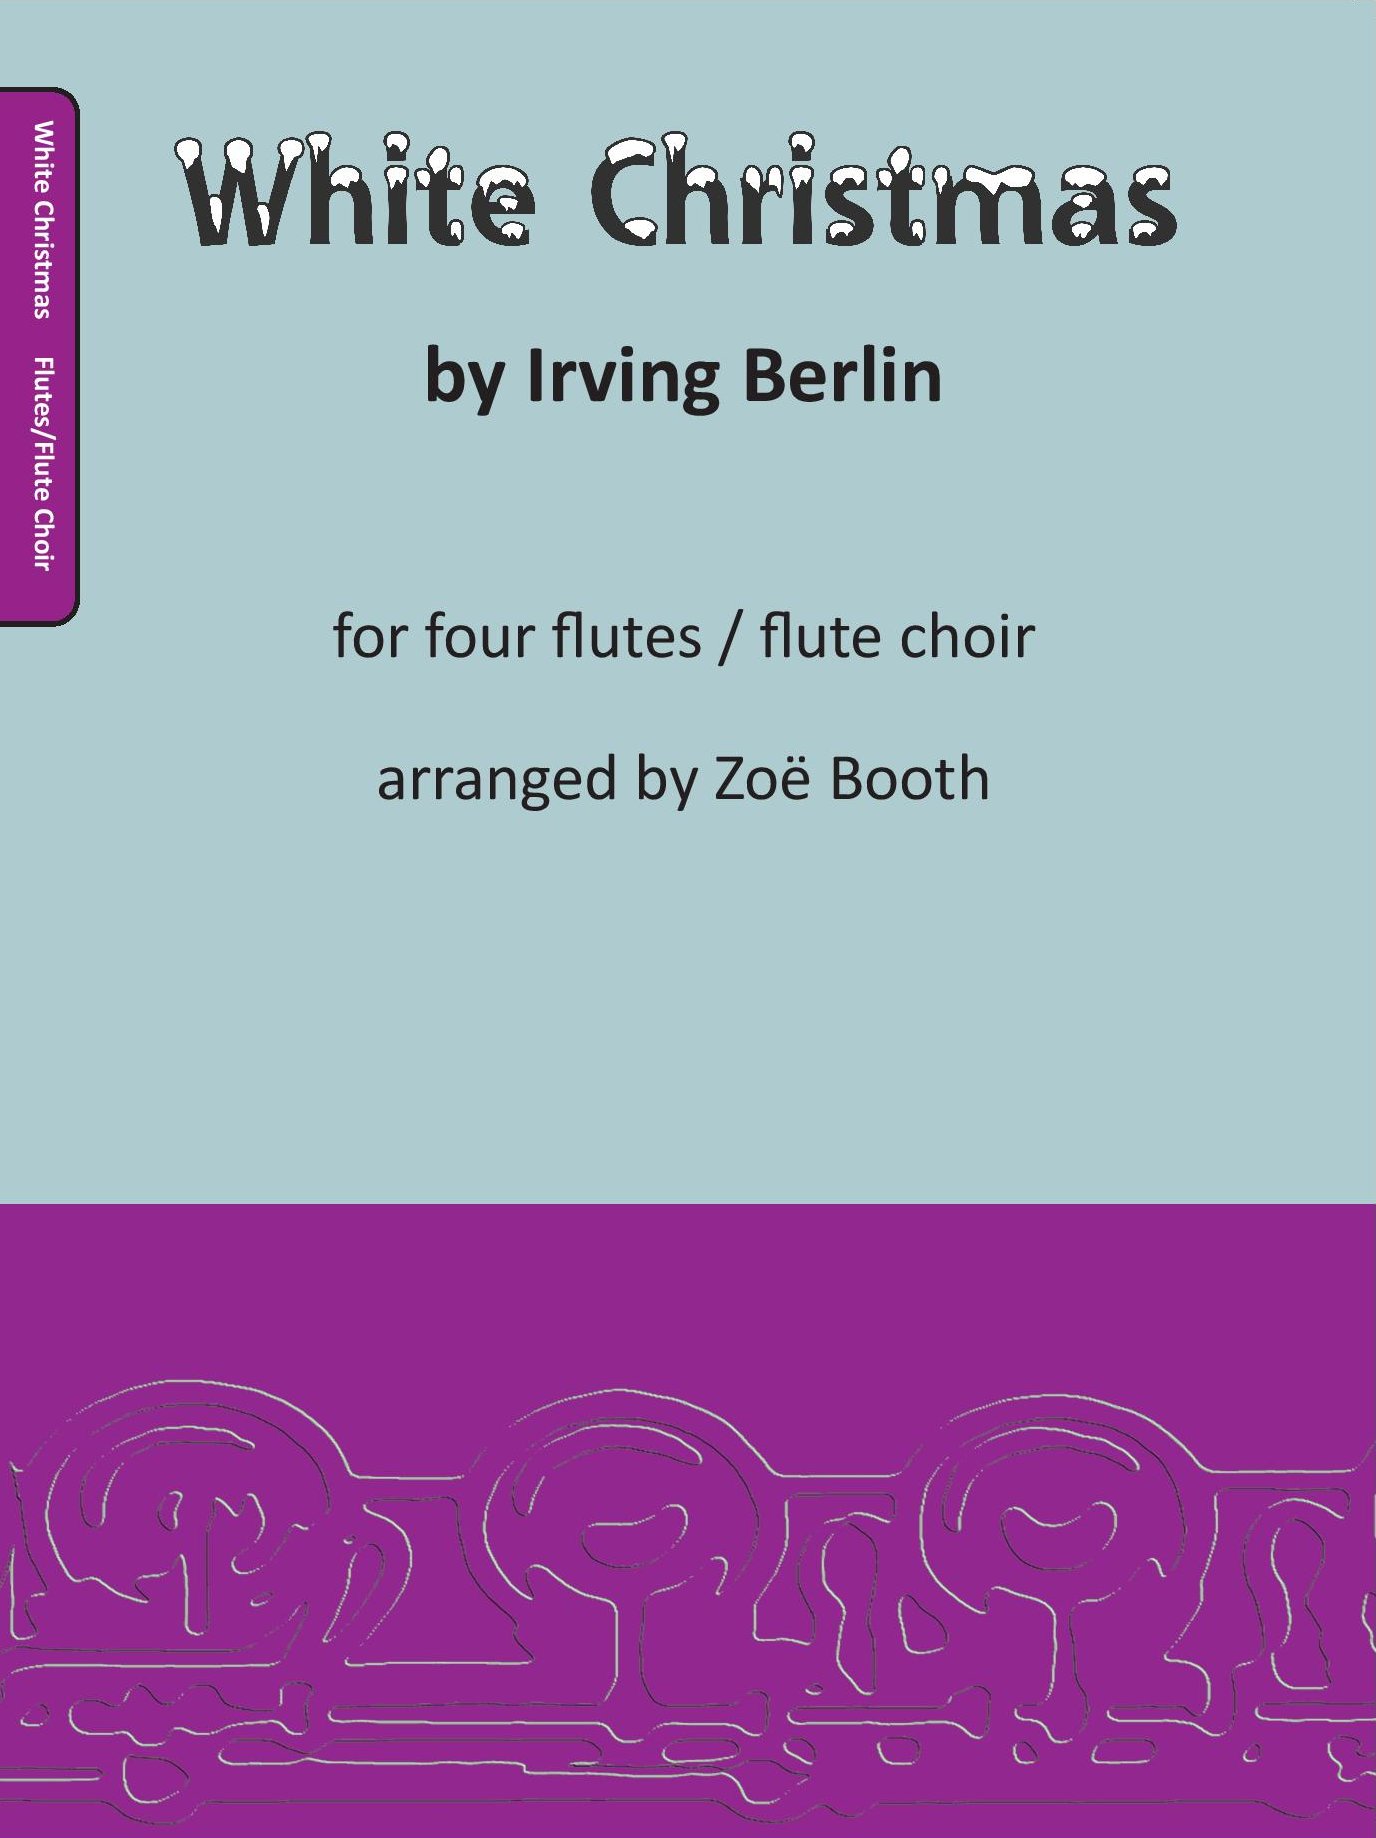 White Christmas by Irving Berlin,  arranged by Zoë Booth for four or more flutes/flute choir